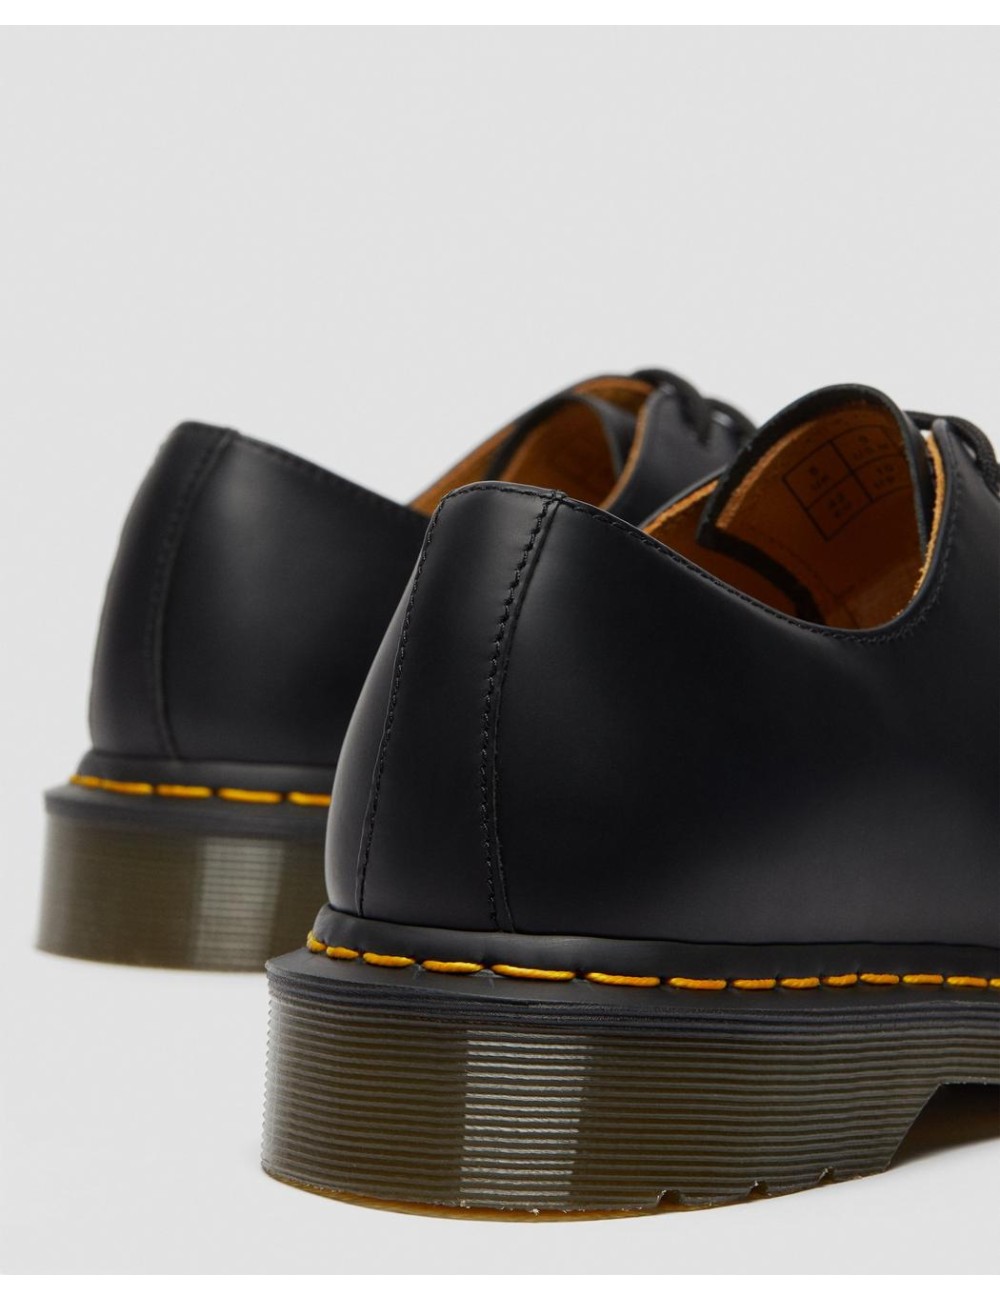 DR MARTENS 1461 SMOOTH LEATHER OXFORD SHOES